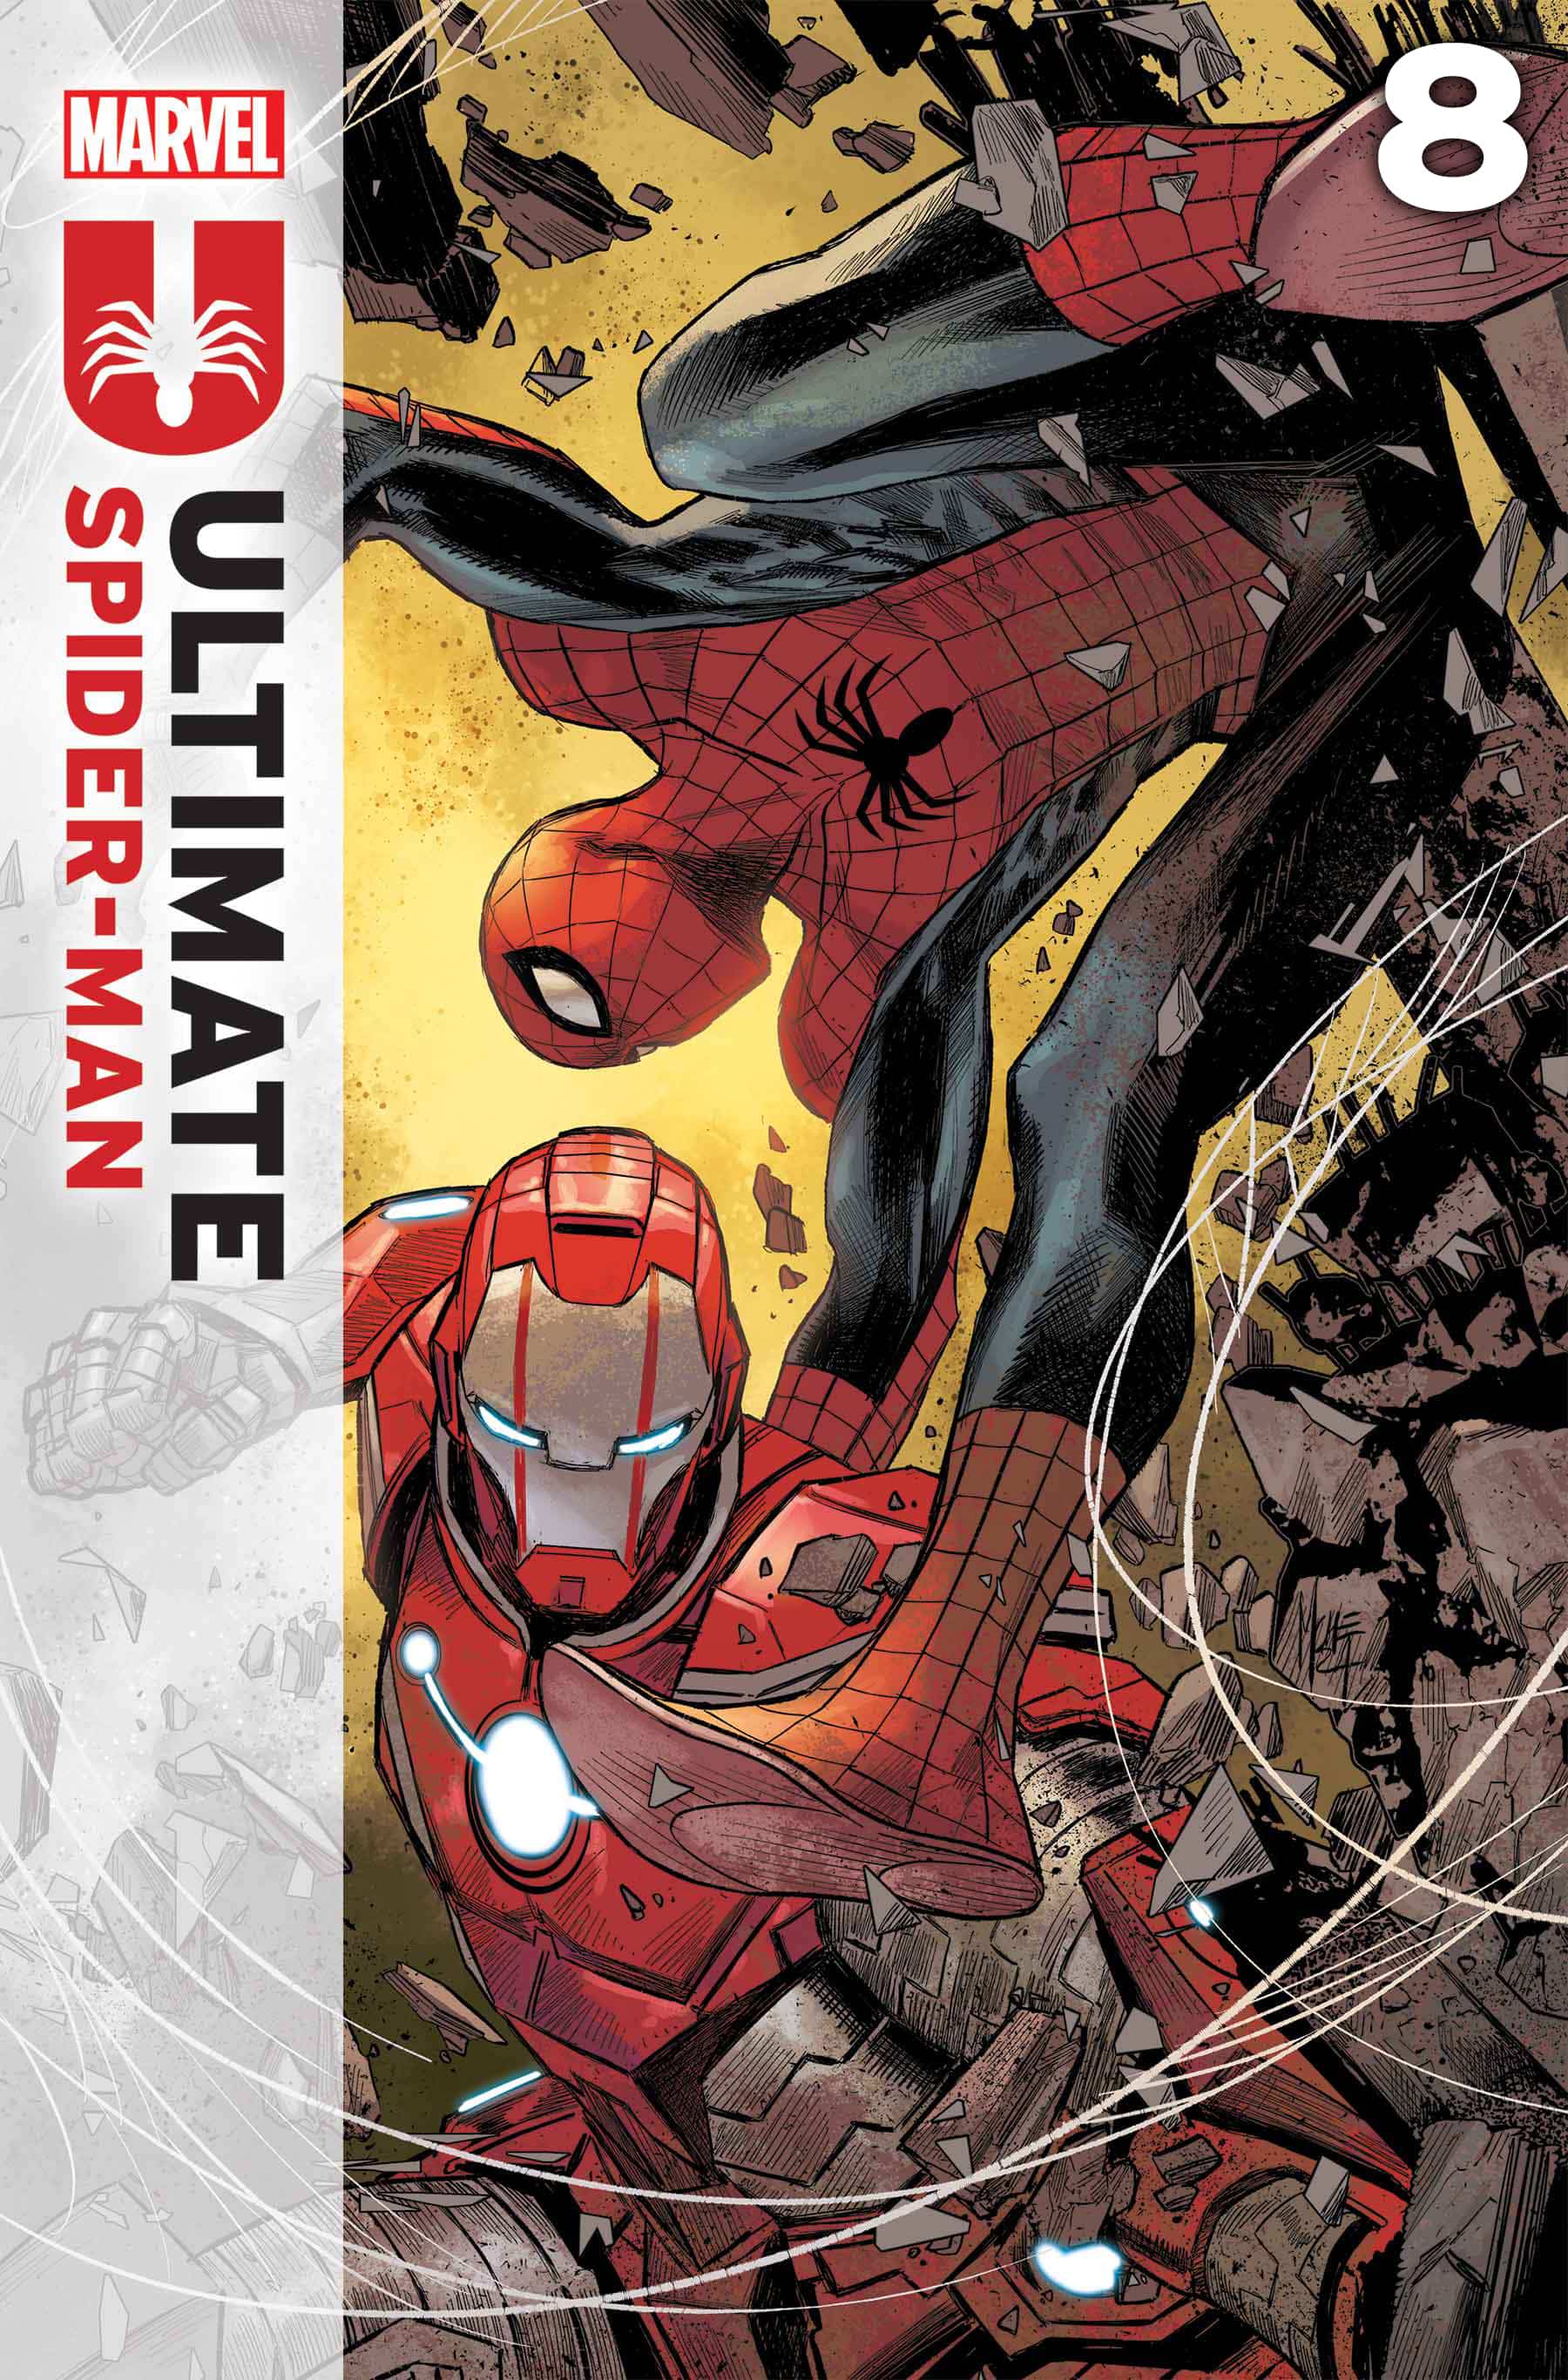 Ultimate Spider-man cover where Spider-Man flips to his left over Iron Man